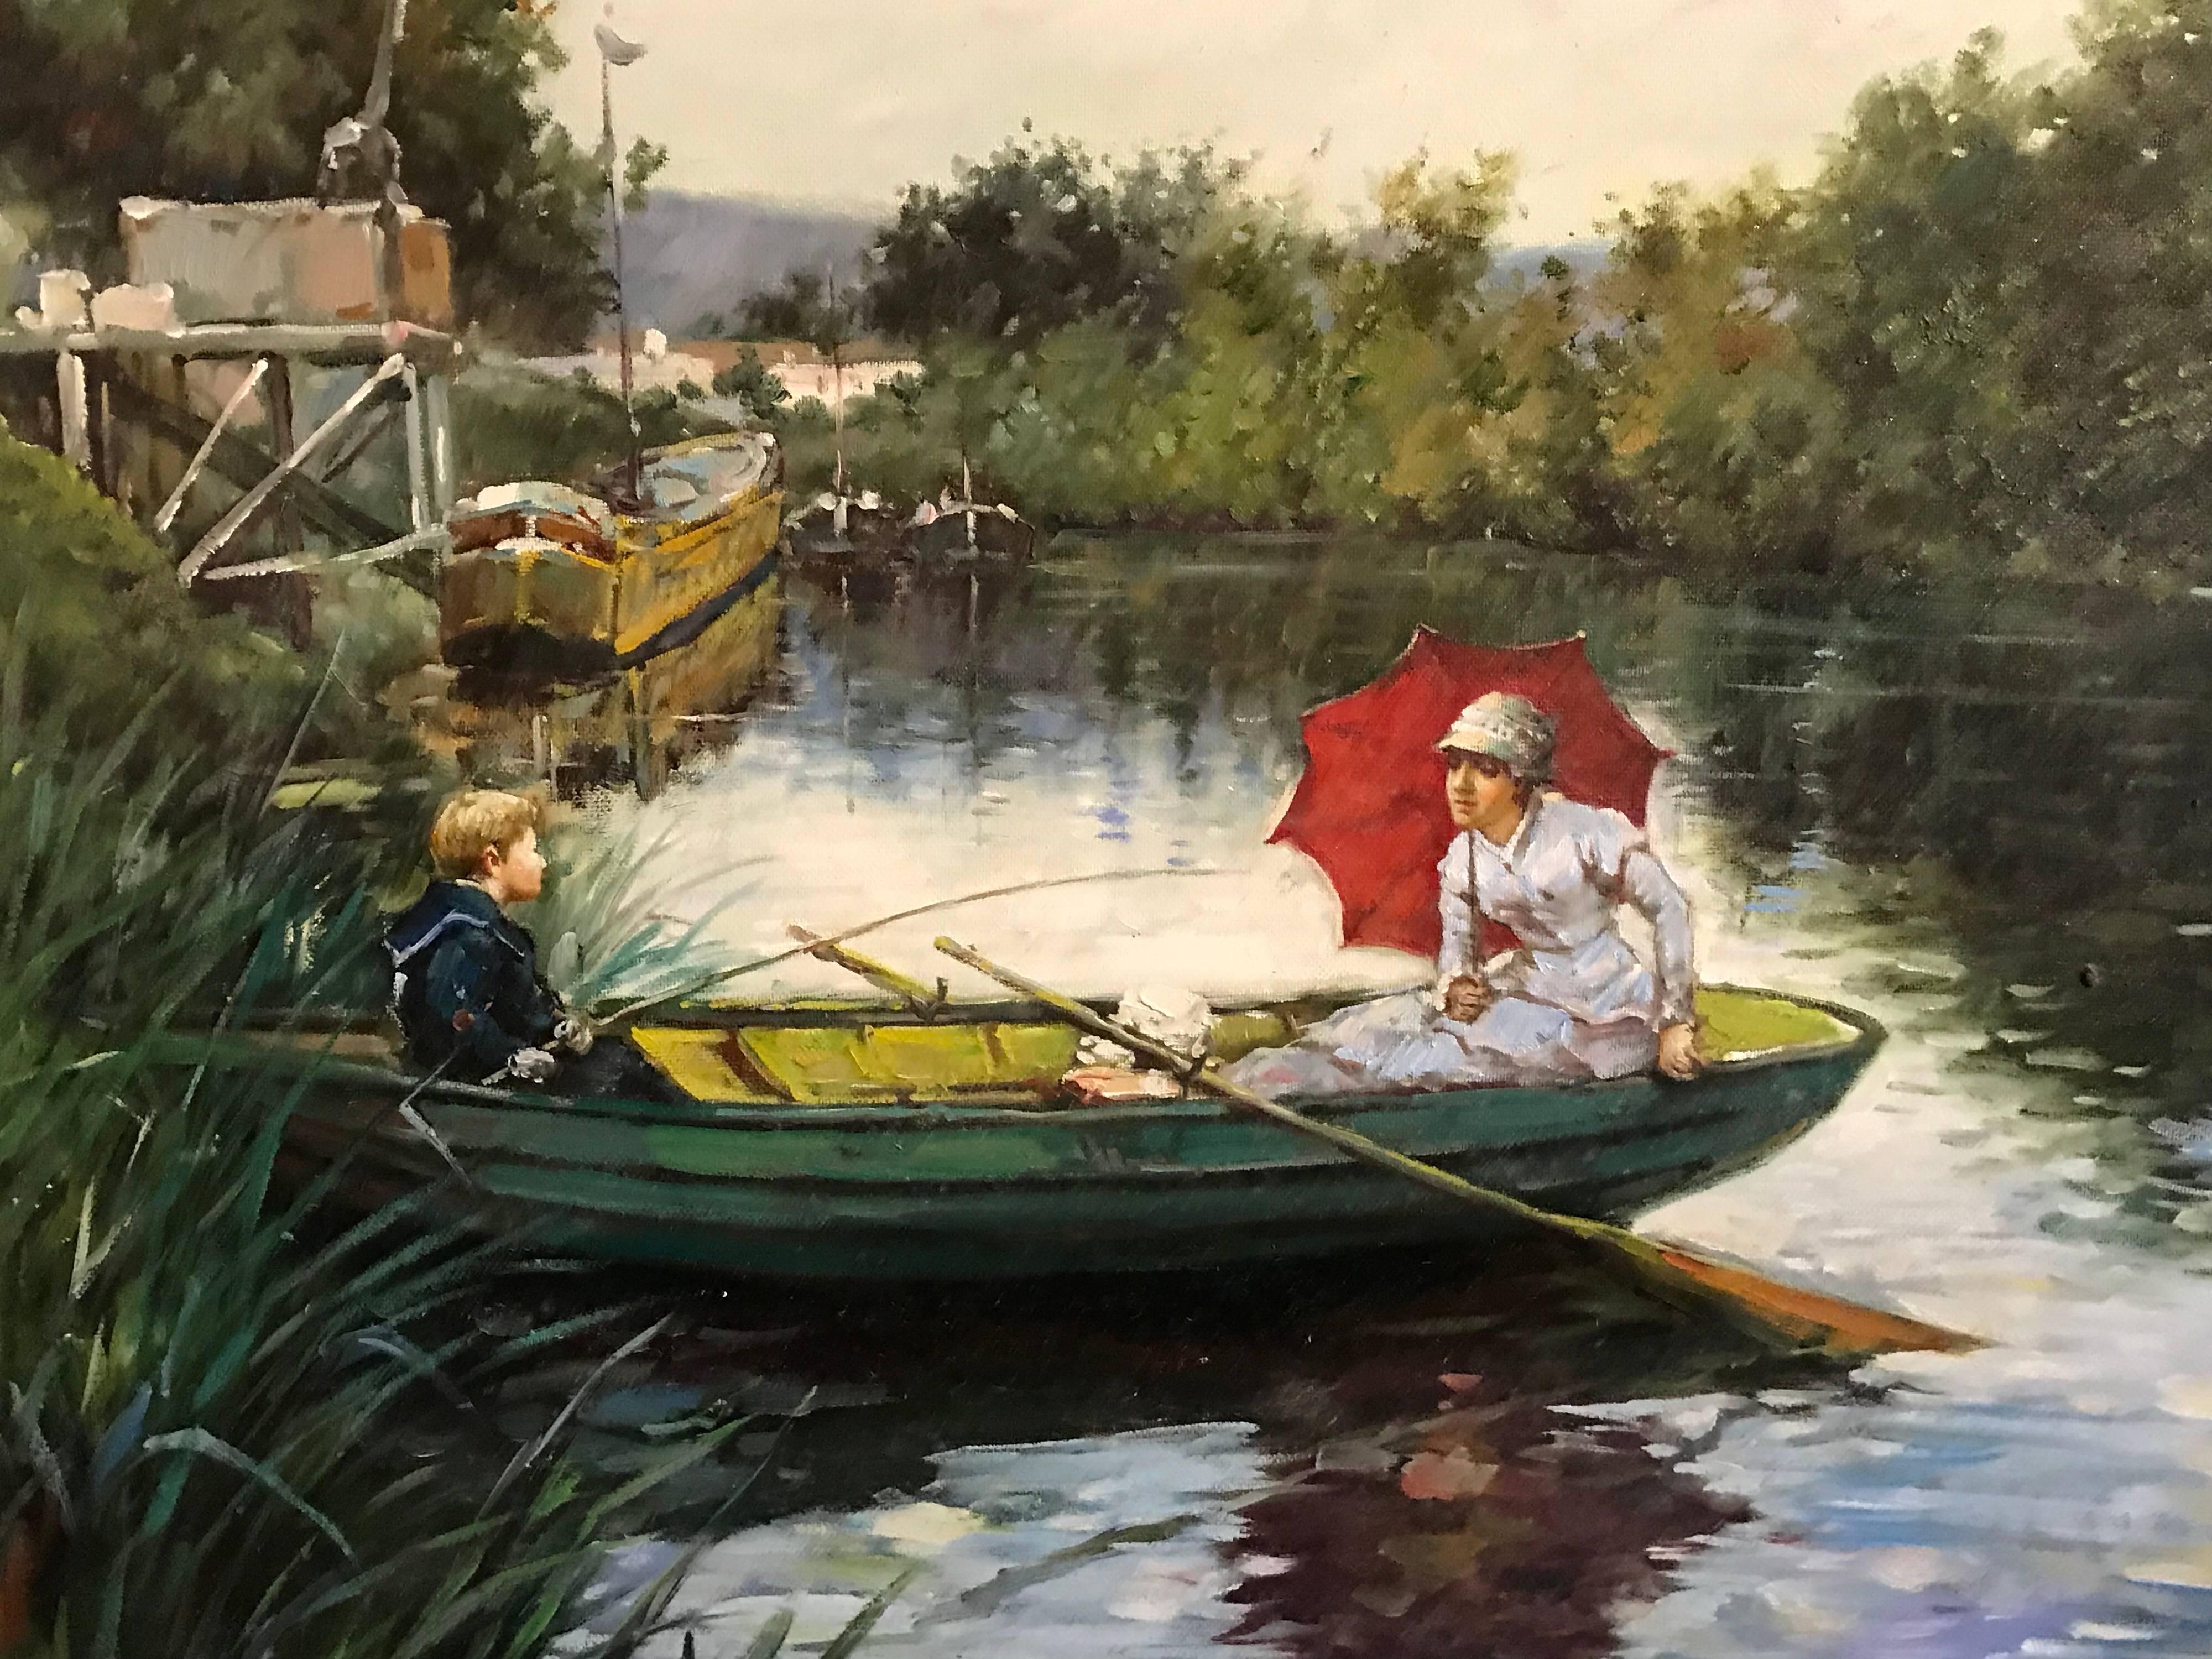 Unknown Landscape Painting - Punting on the River, large oil painting on canvas